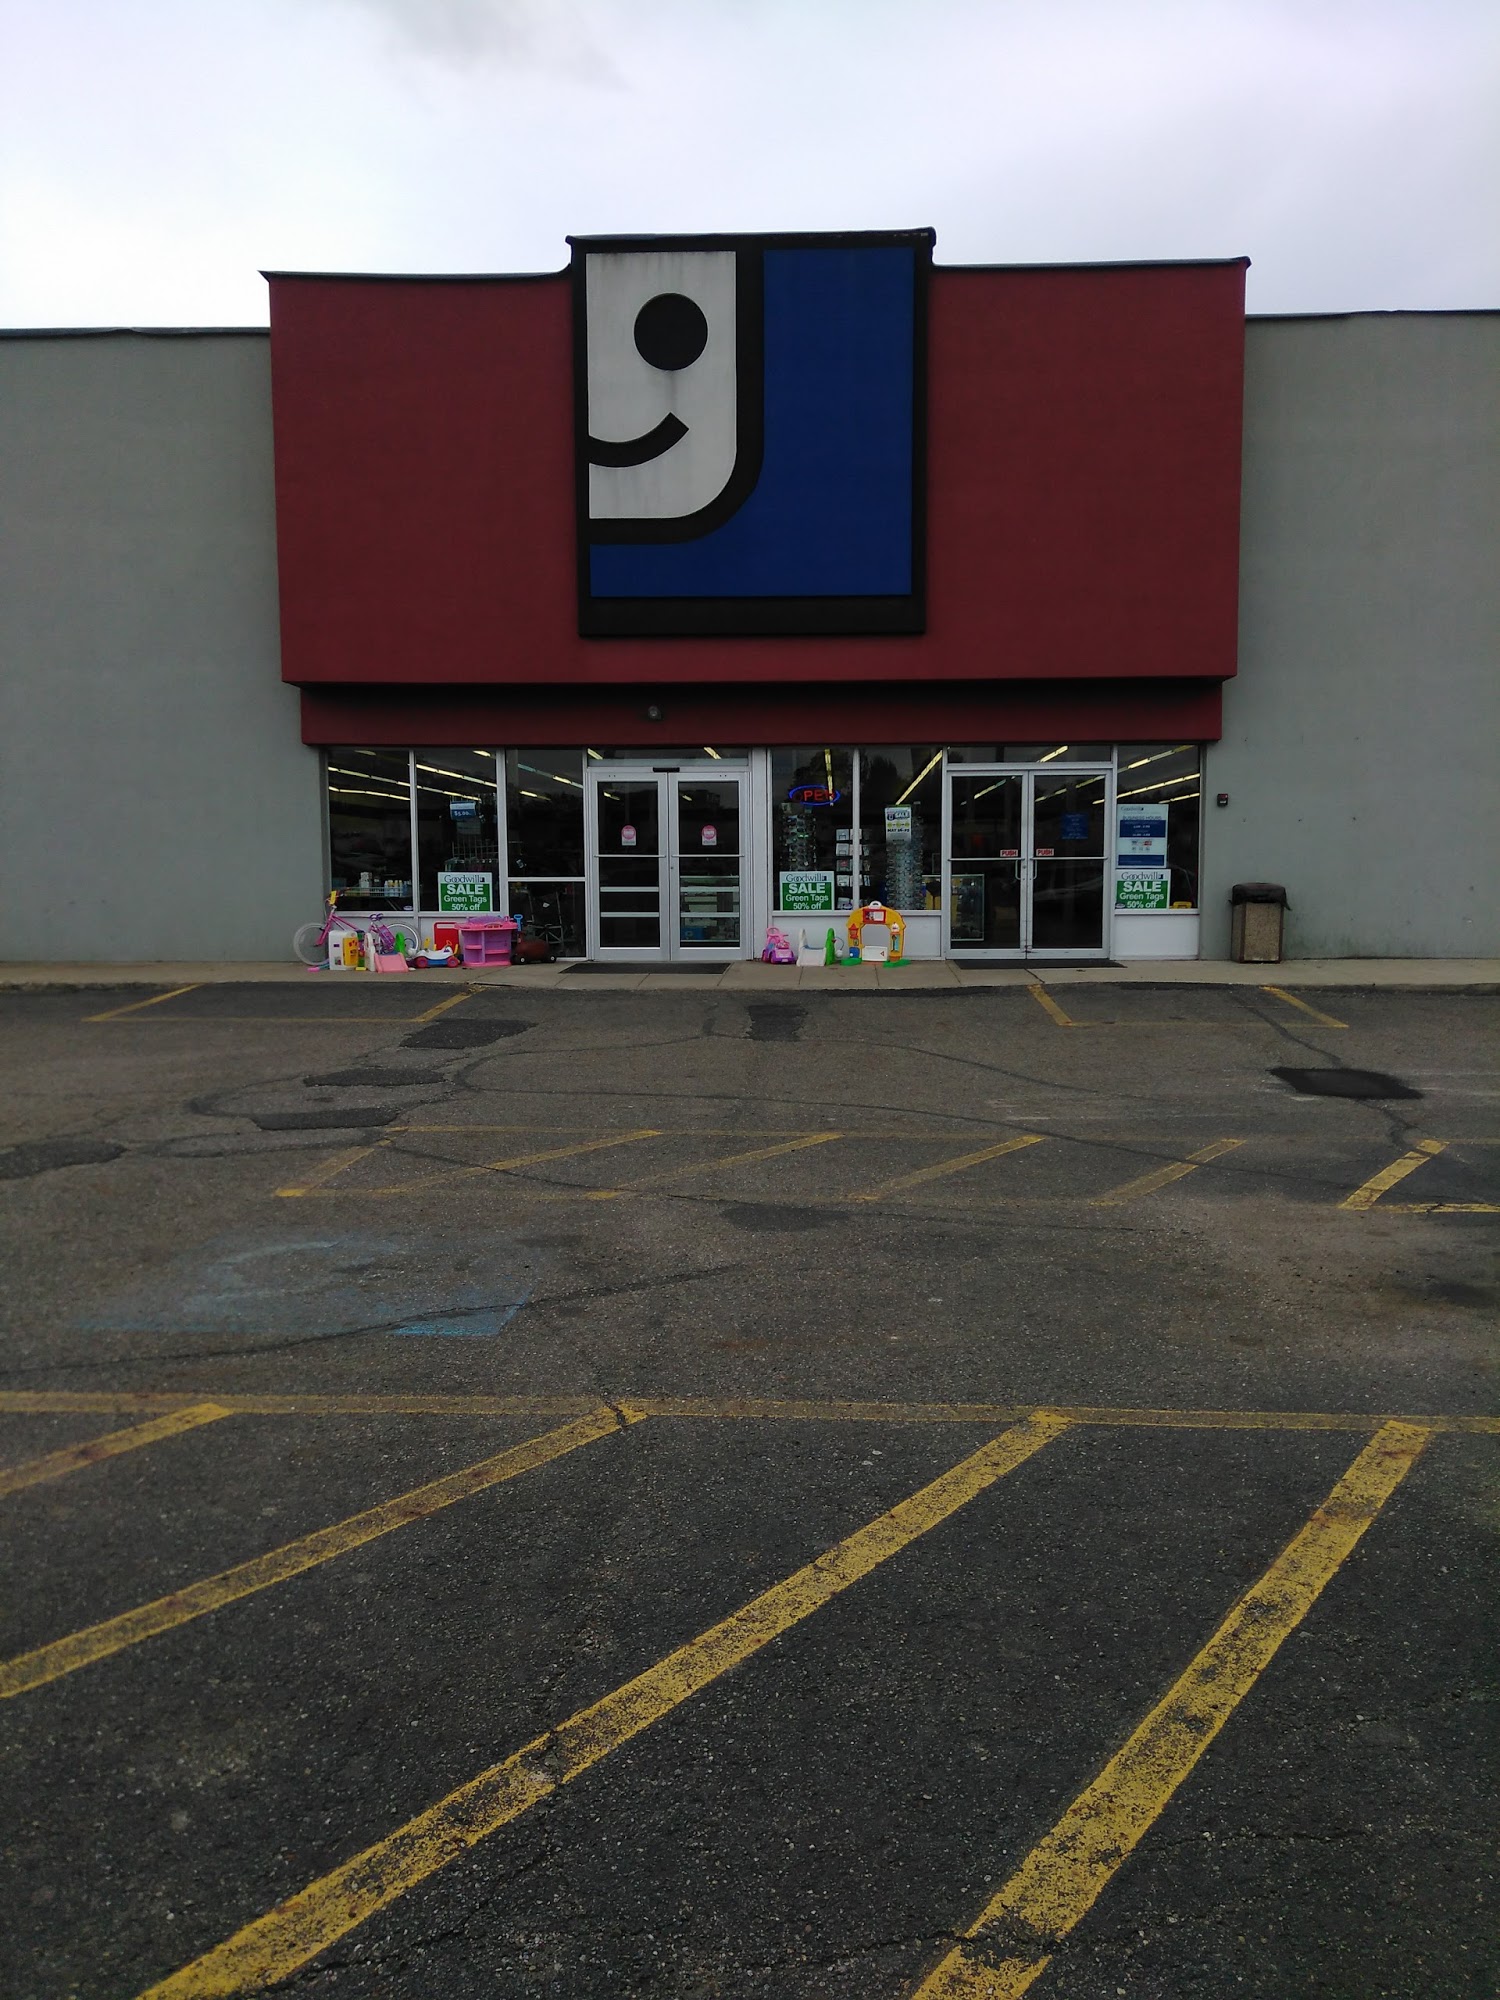 Goodwill Industries of Greater Cleveland & East Central Ohio